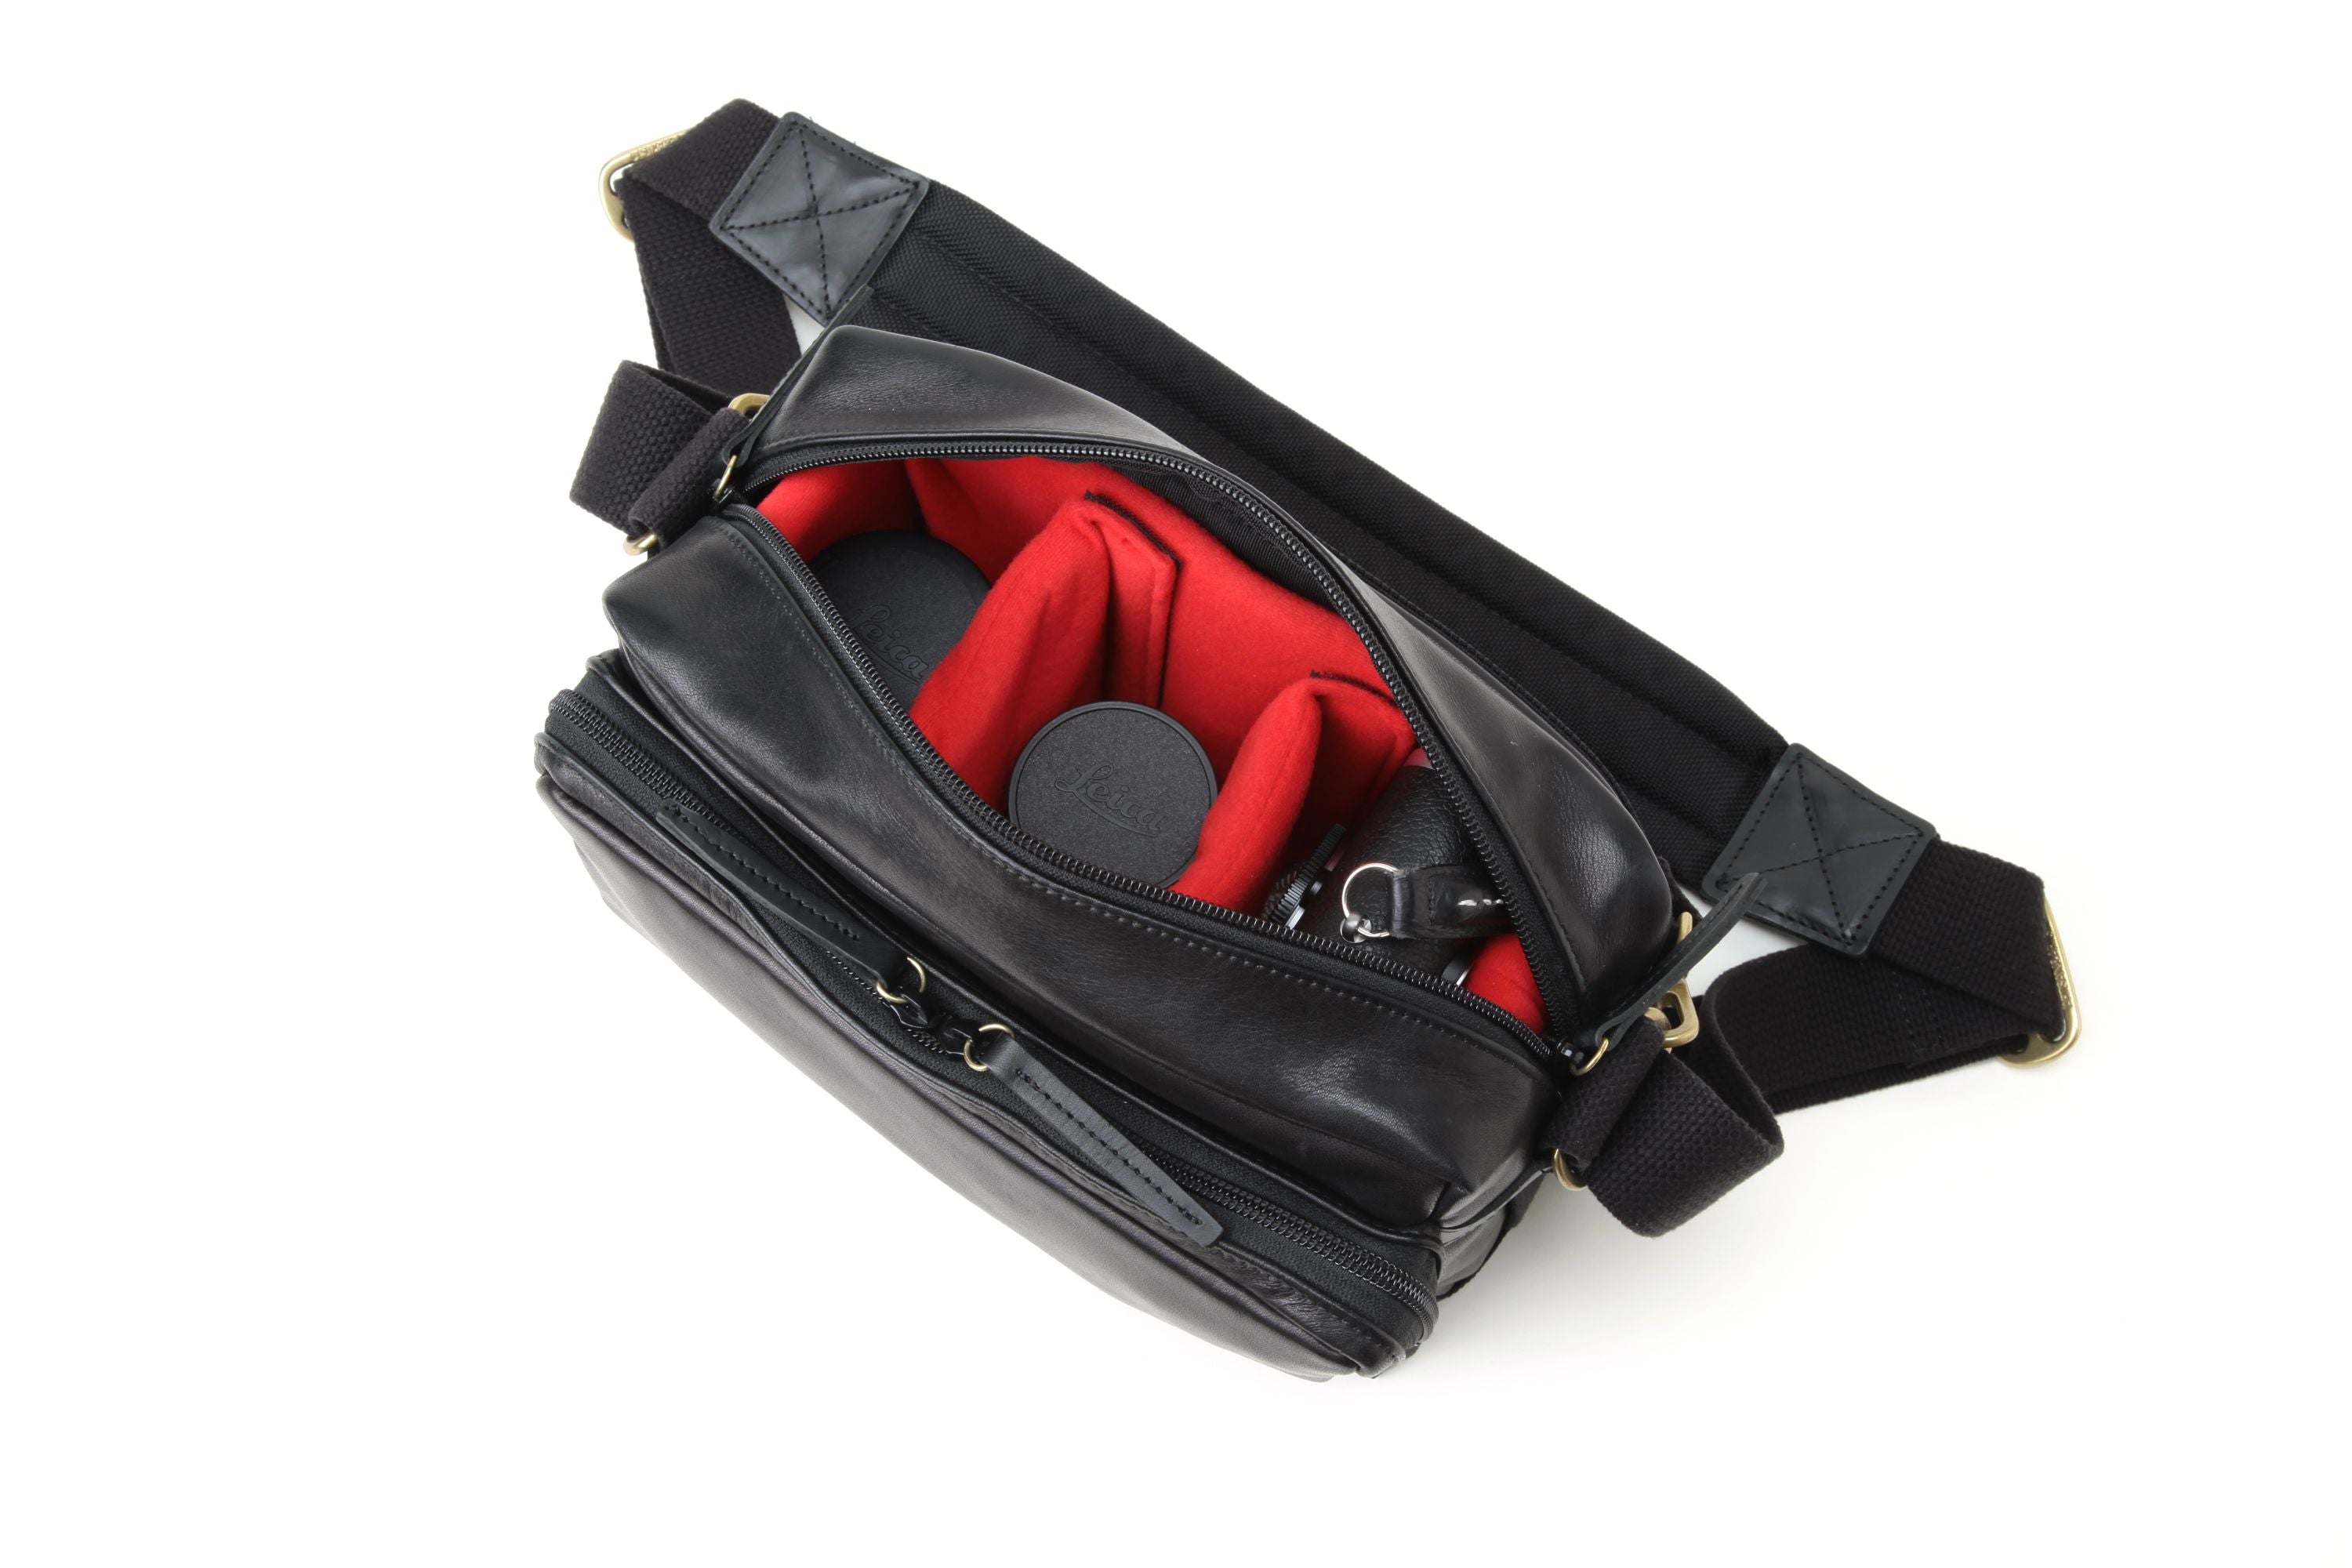 Leather Camera Bag - Functional, Sophisticated, and Urban Design